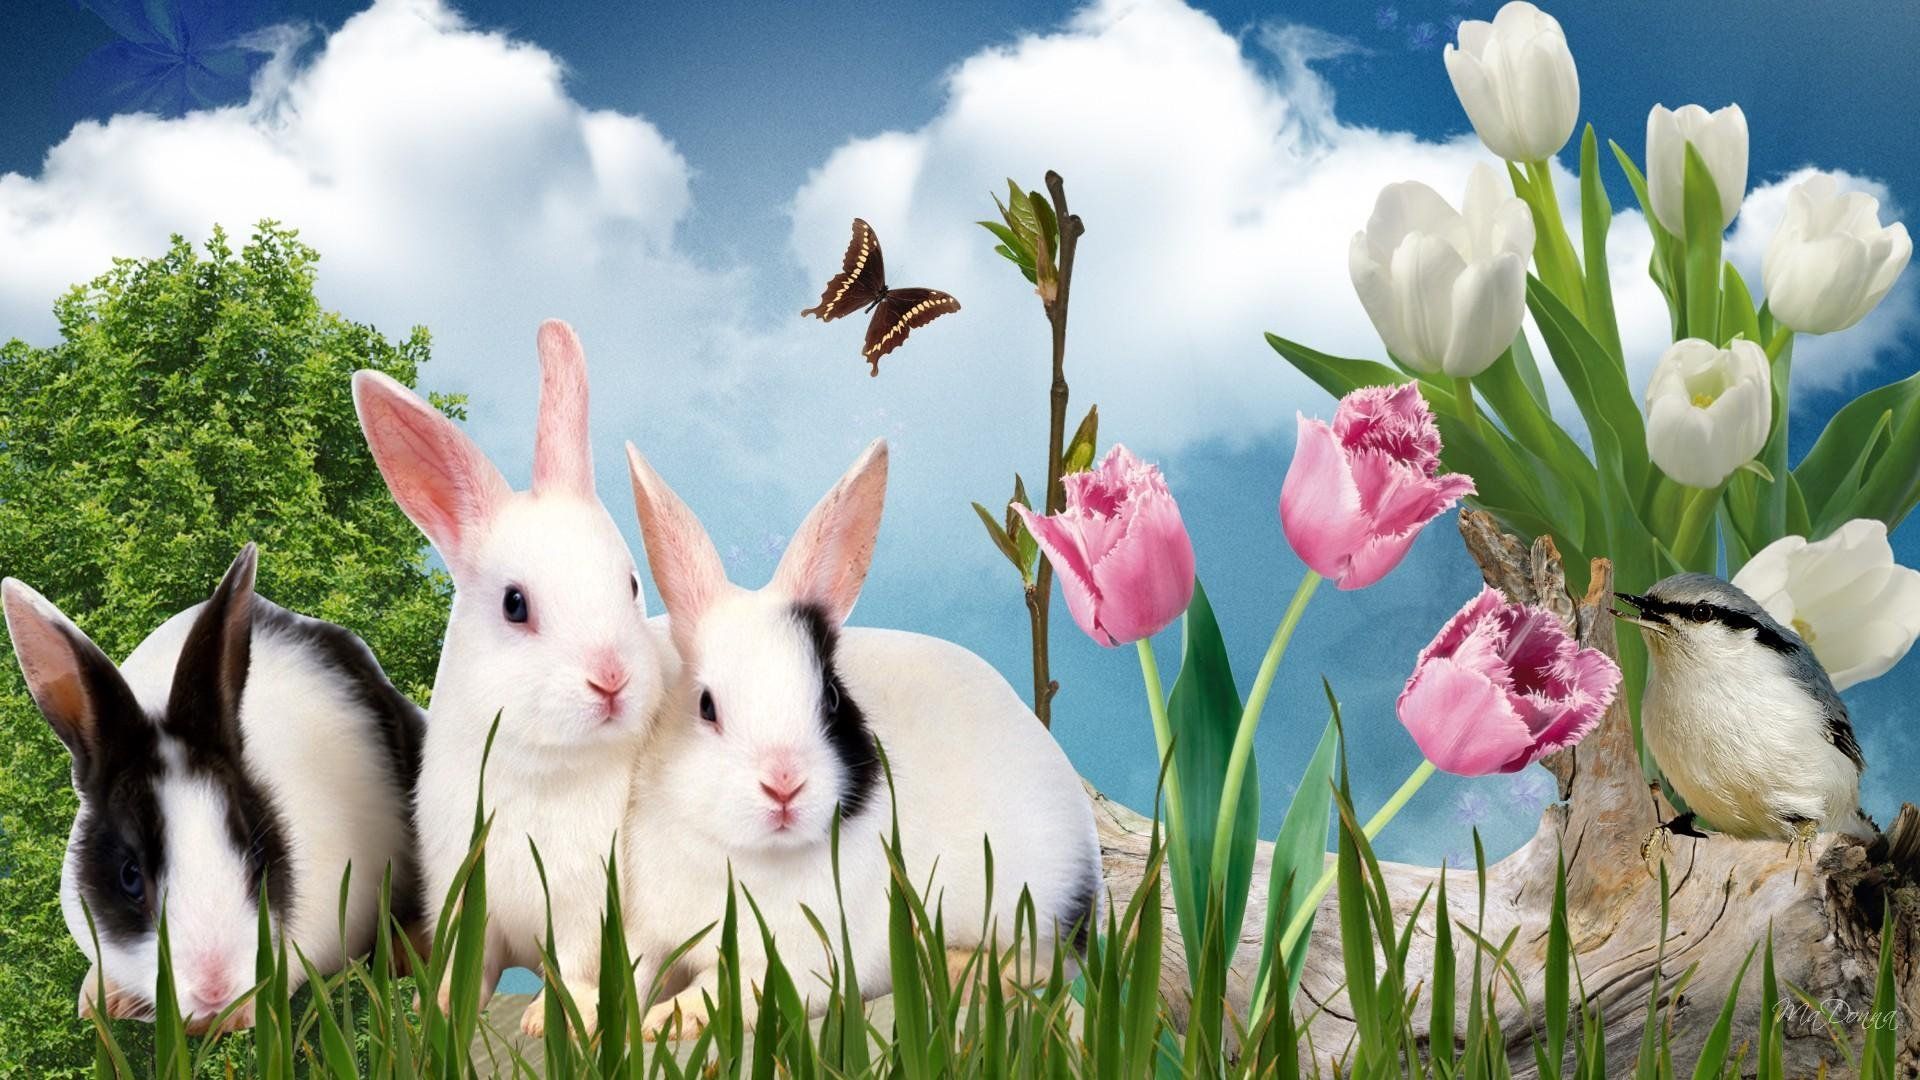 Beautiful Spring Desktop Wallpaper animals large. Bunny wallpaper, Facebook cover image, Easter bunny picture